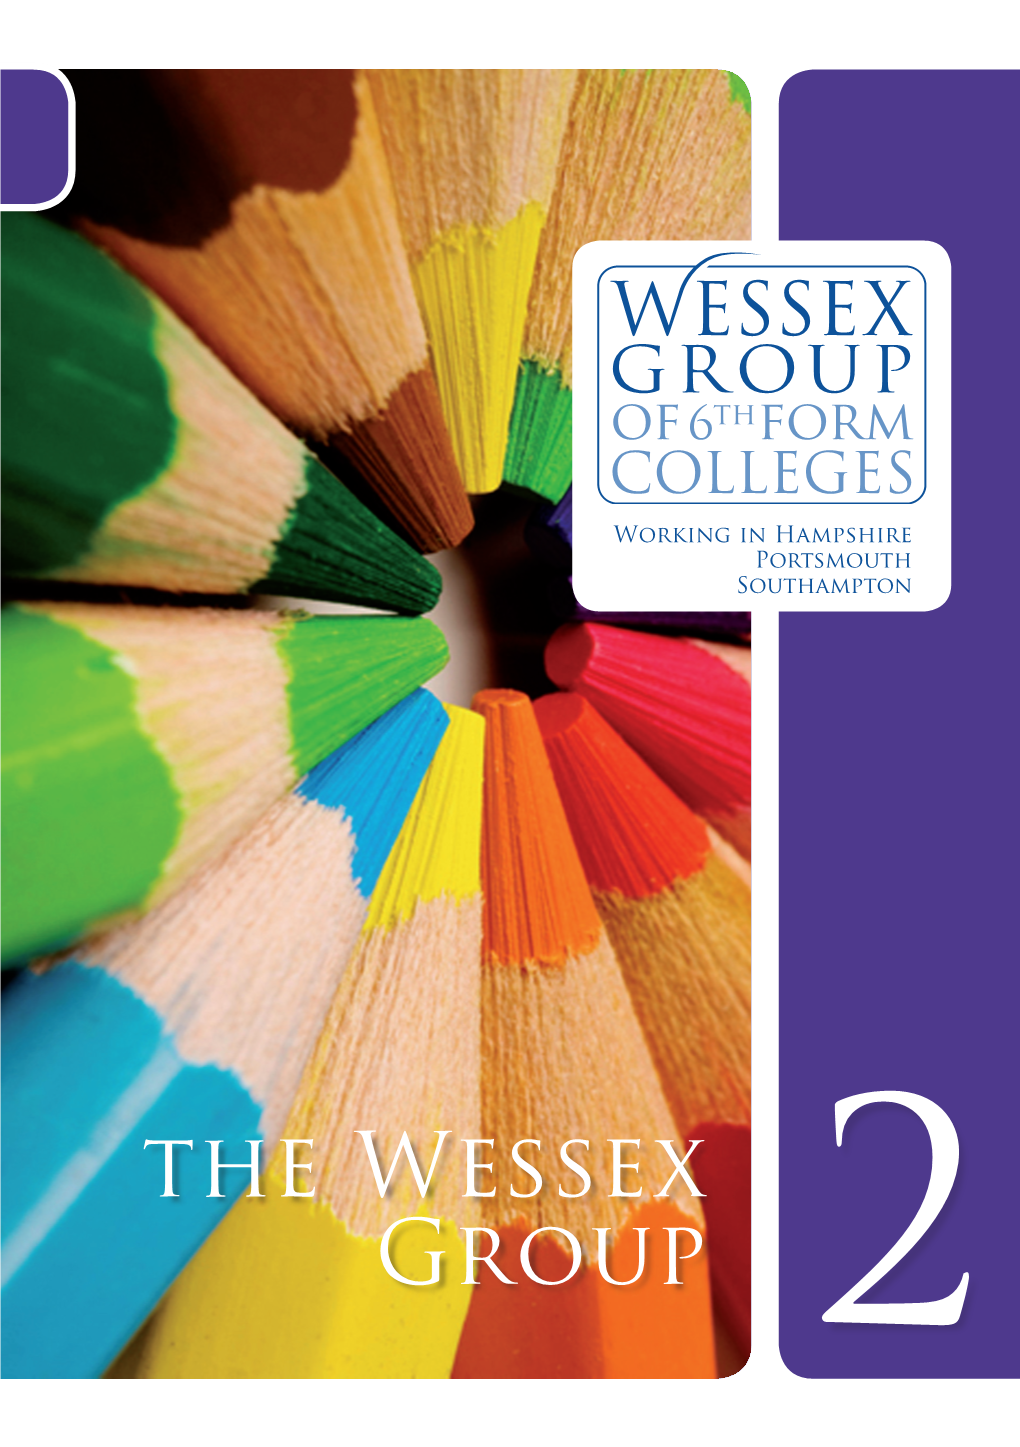 Wessex Group of Sixth Form Colleges Is a Partnership of 11 Sixth Form Colleges in Hampshire, Portsmouth Who We Are and Southampton